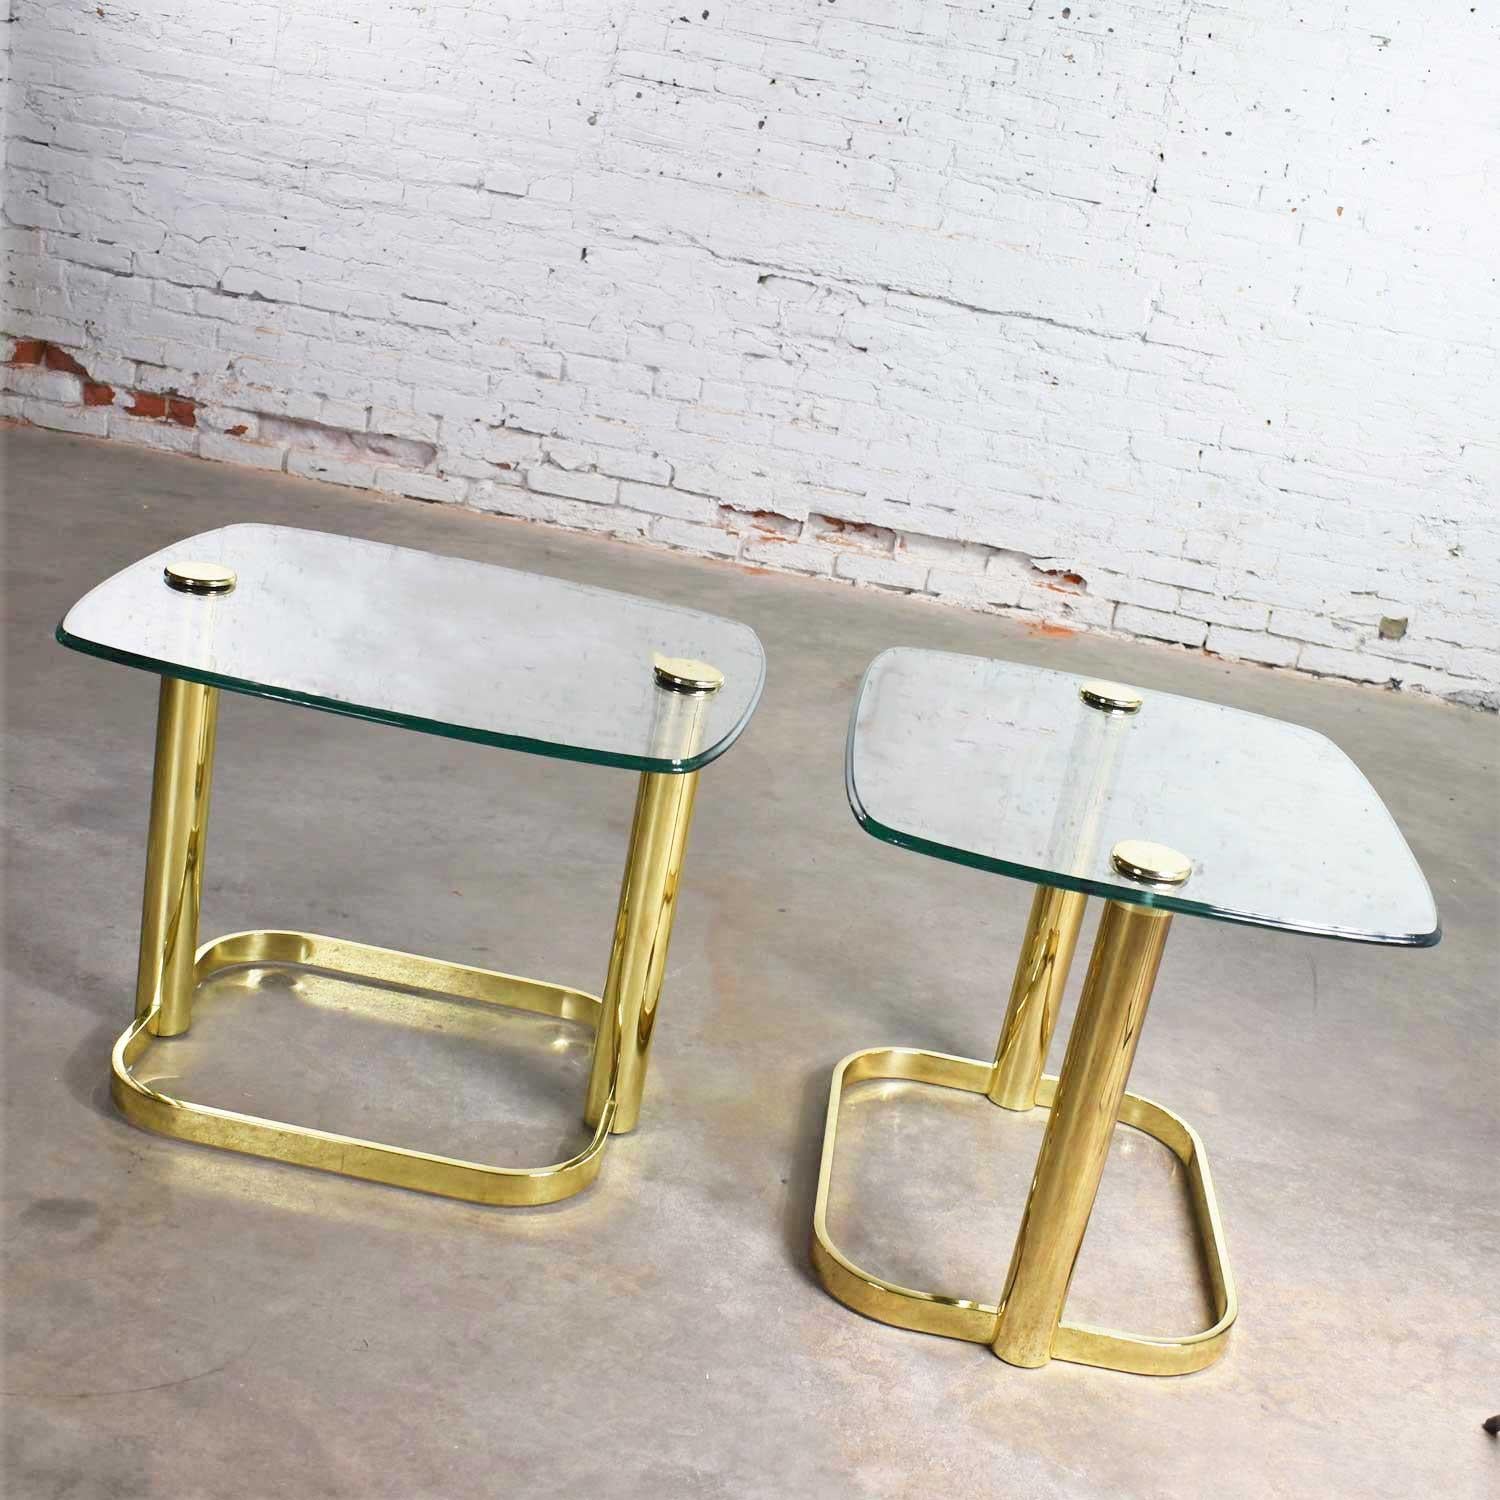 American Modern Pair of End Tables Brass Plate & Glass Attr Rosen for The Pace Collection